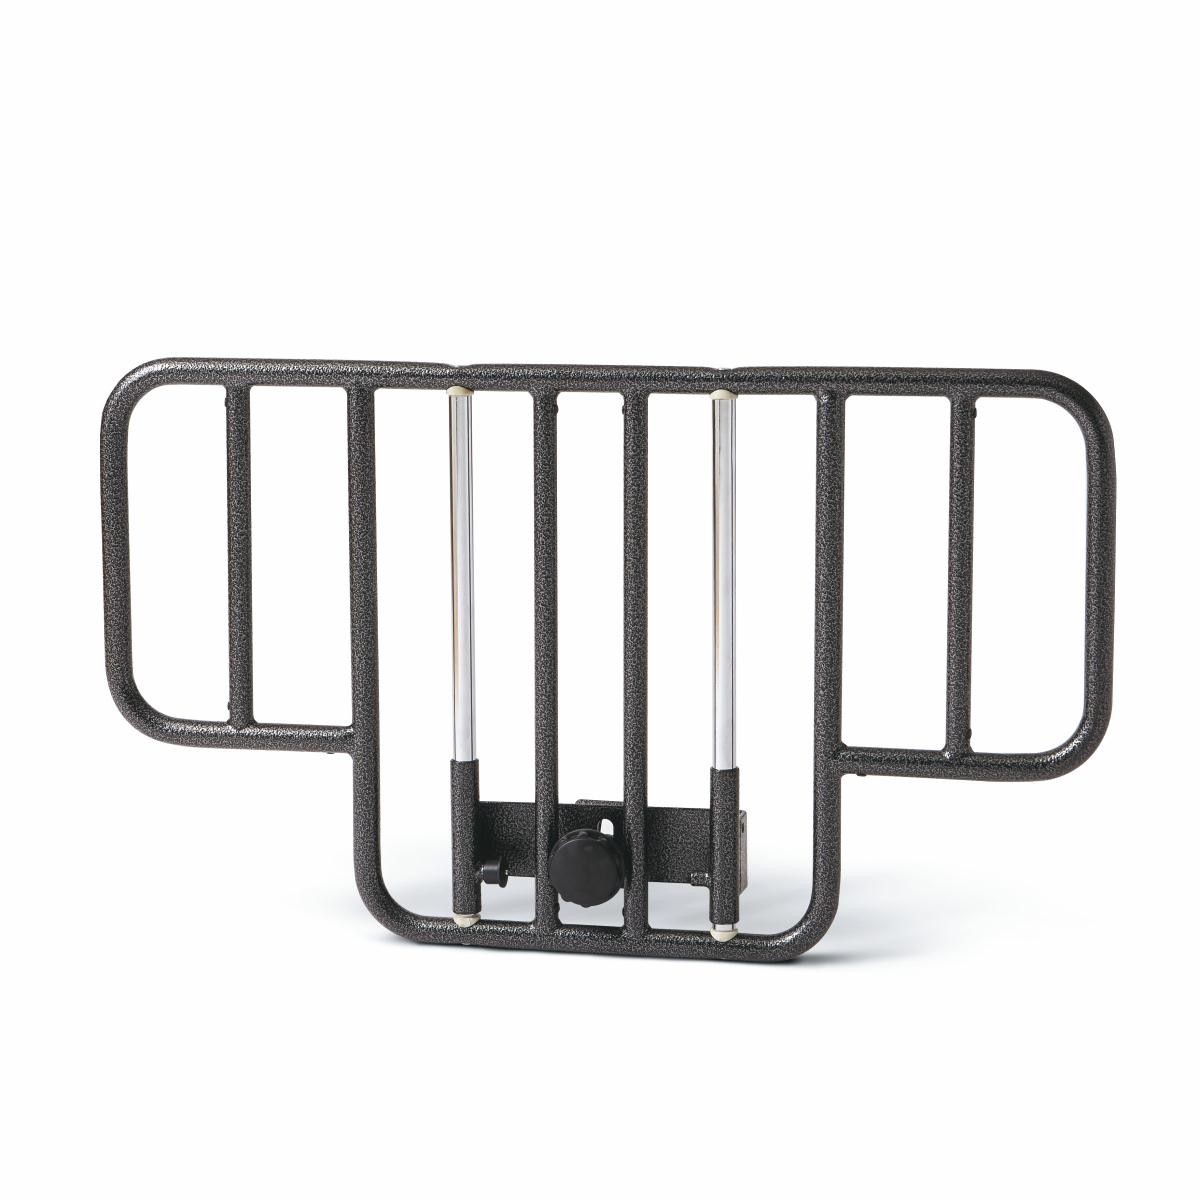 replacement hardware for hospital bed safety rails